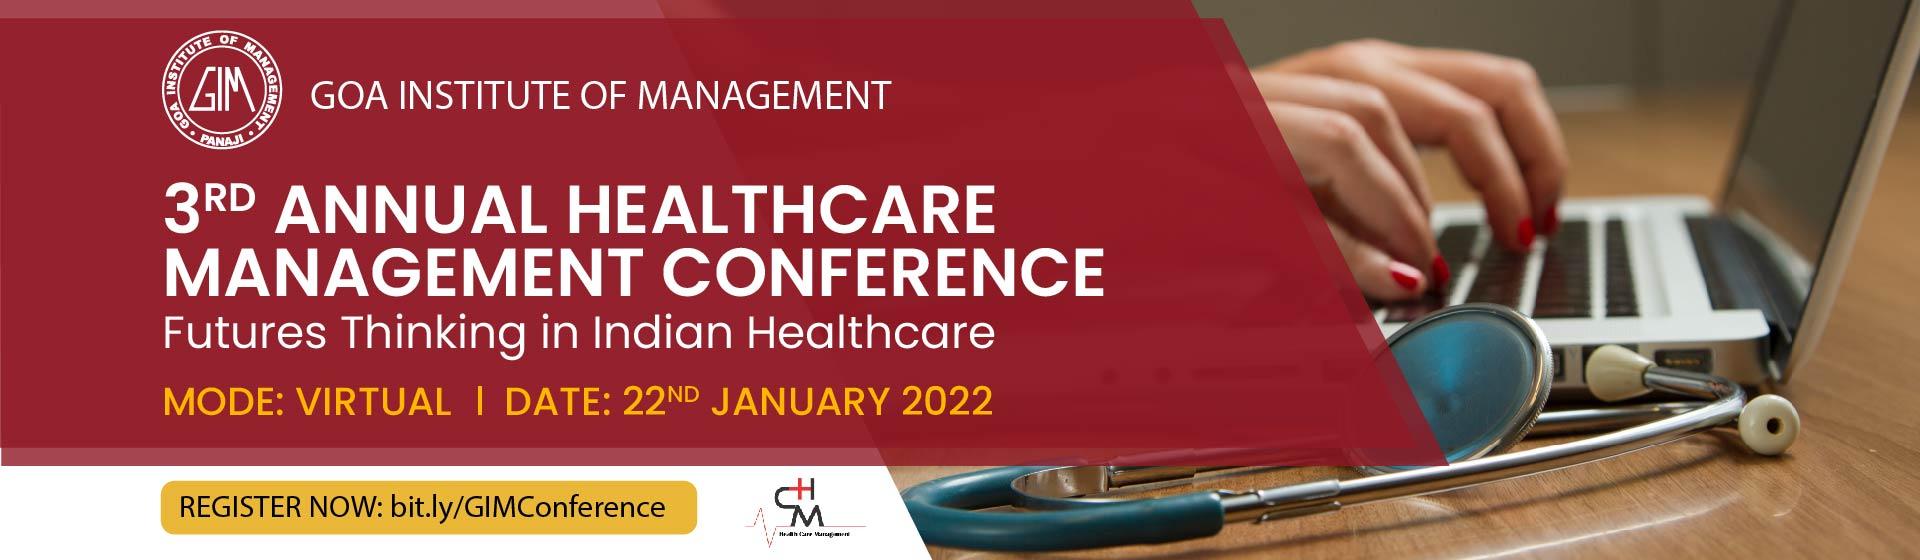 Third Annual Healthcare Management Conference 22nd January 2022